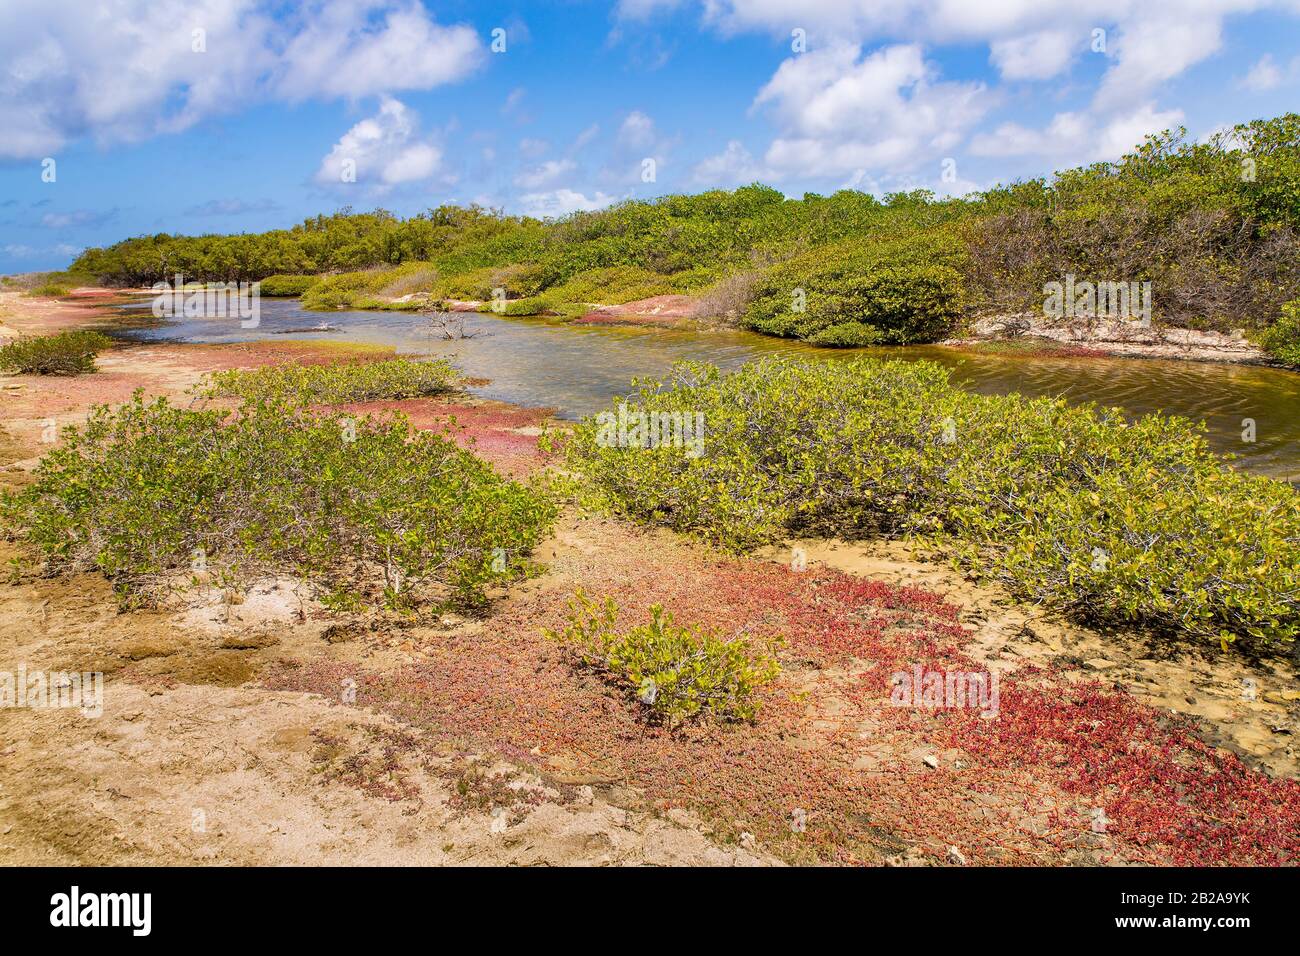 Landscape with mangrove forest and water on island Bonaire Stock Photo